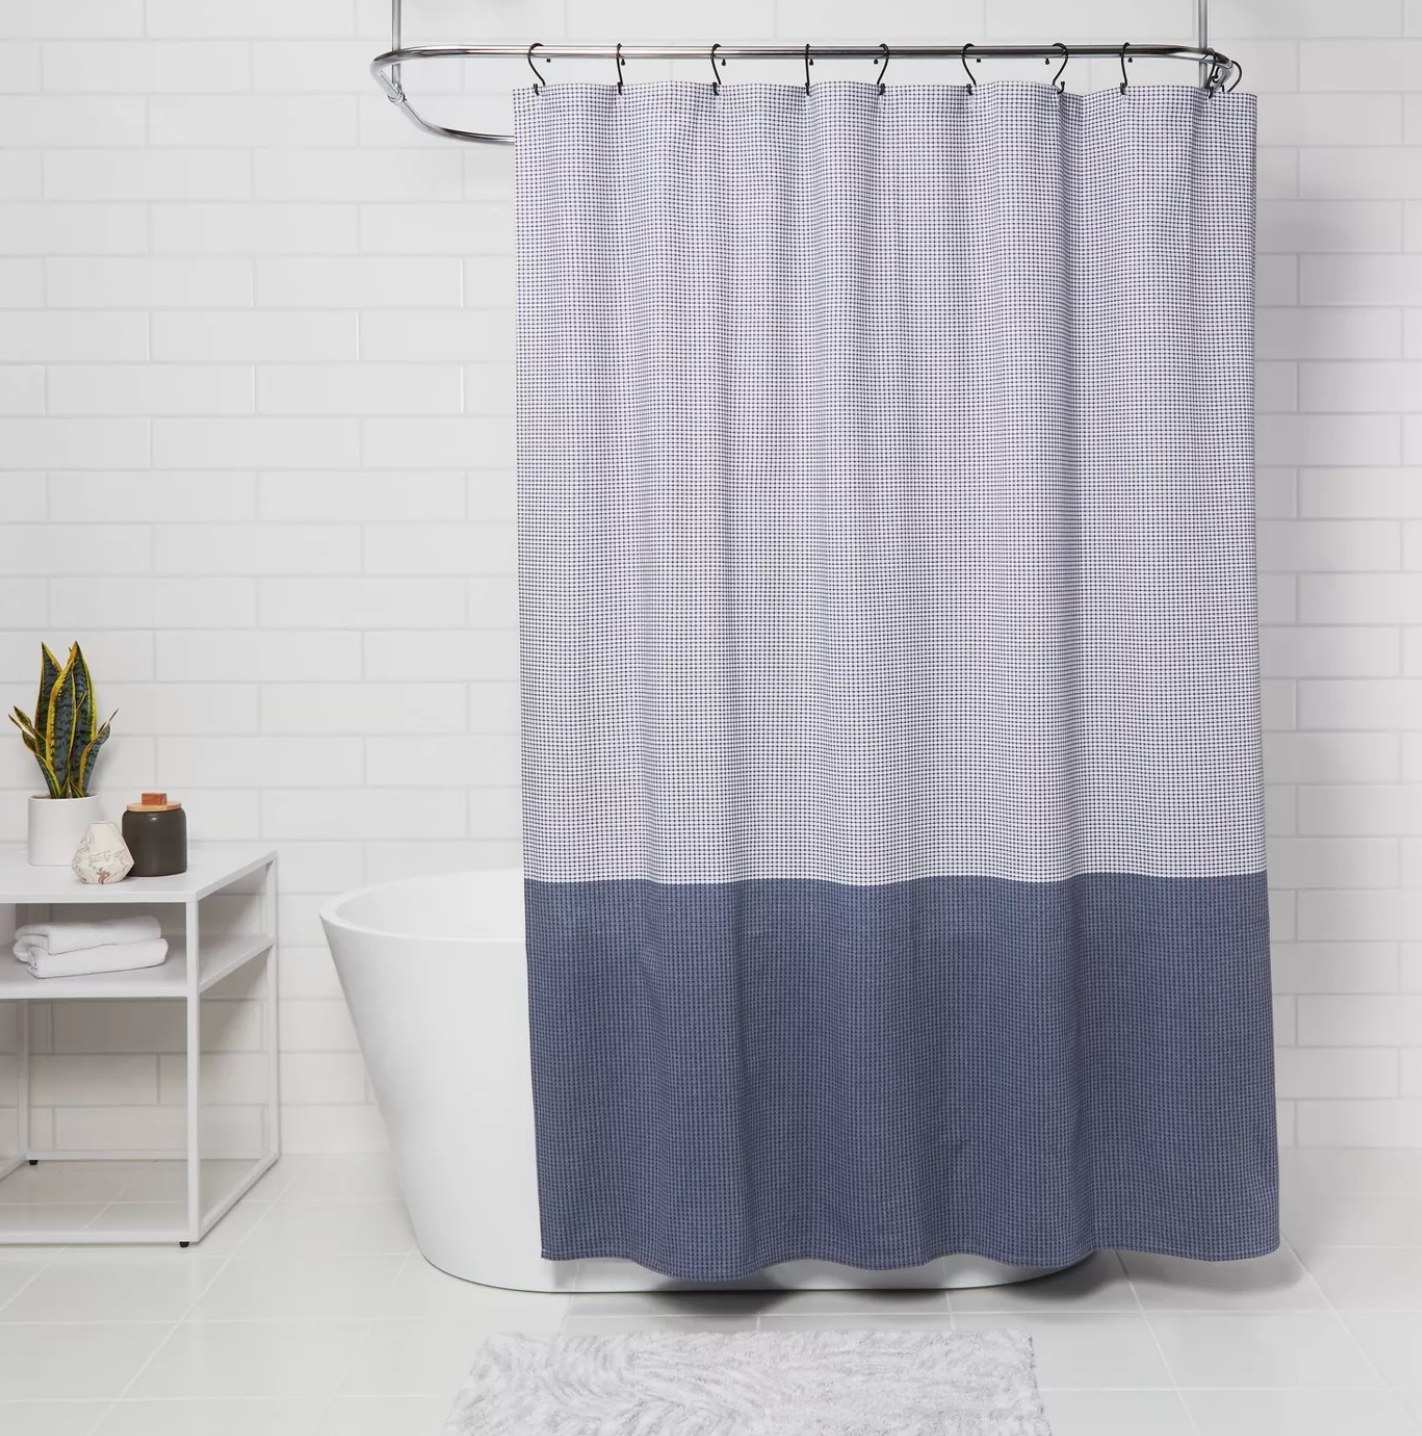 the shower curtain with the top half light blue and bottom half dark blue hanging over a white bathtub